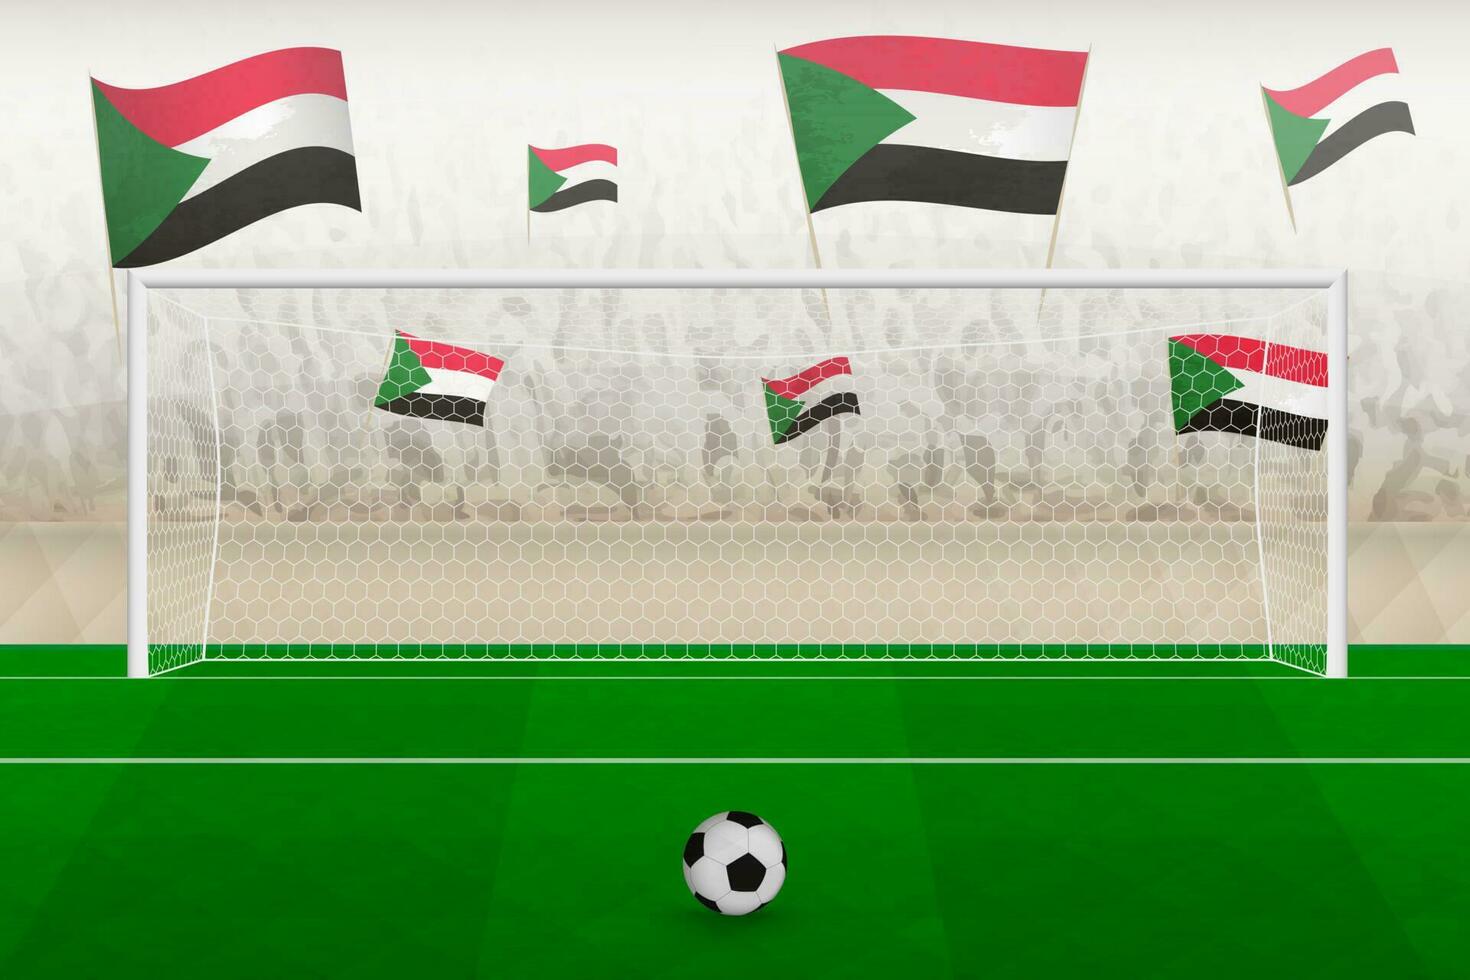 Sudan football team fans with flags of Sudan cheering on stadium, penalty kick concept in a soccer match. vector